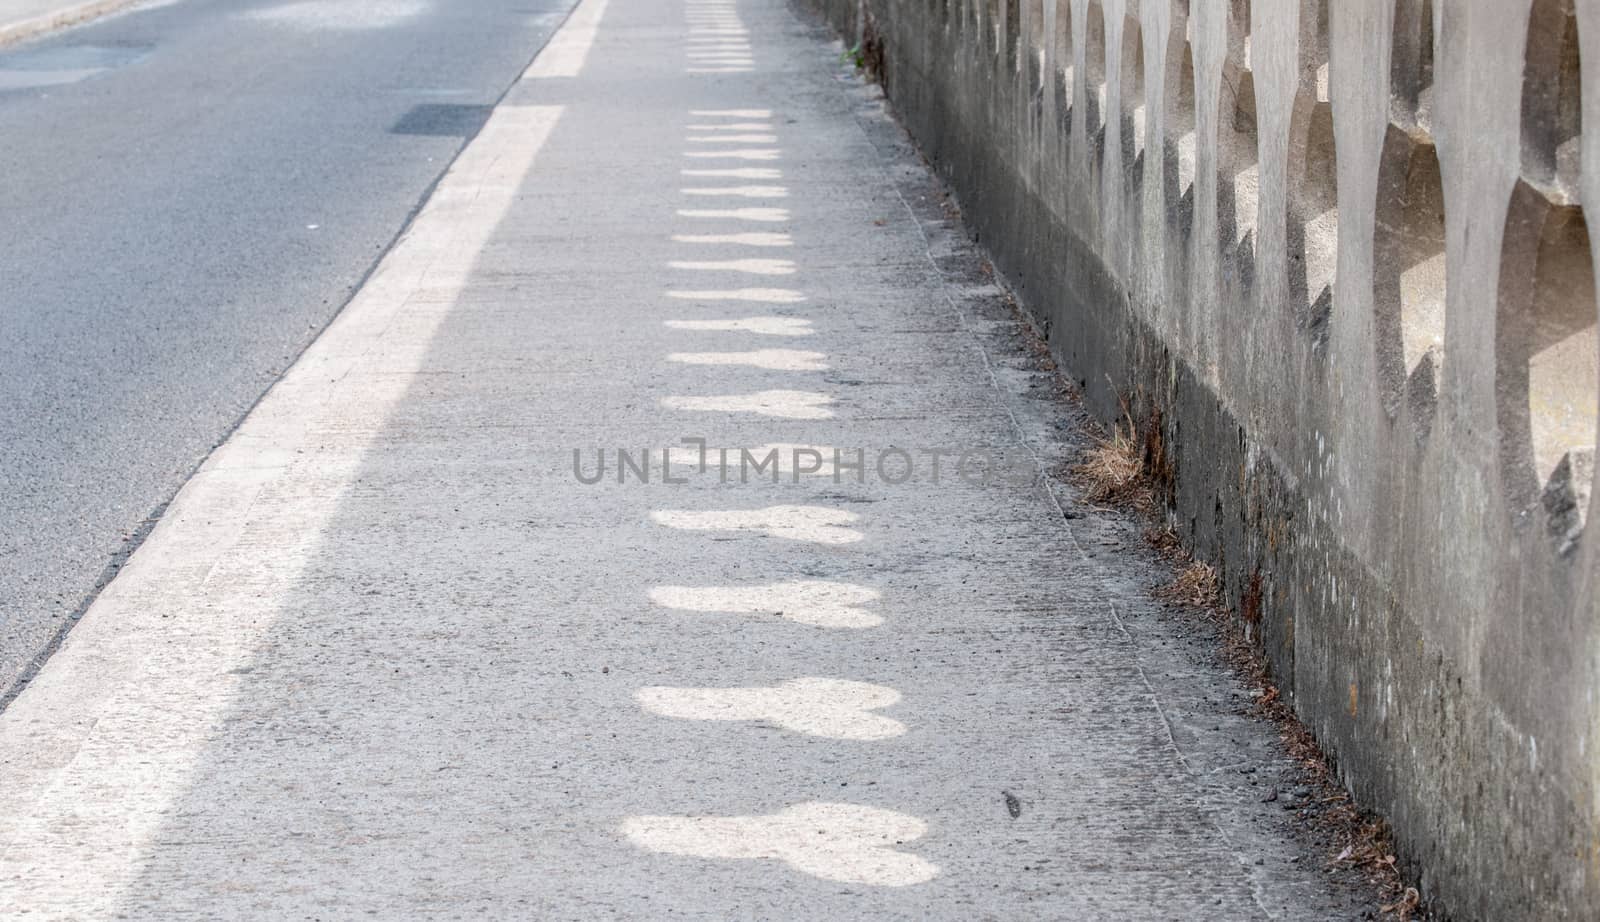 rude shapes on pavement caused by light shinning through by sirspread